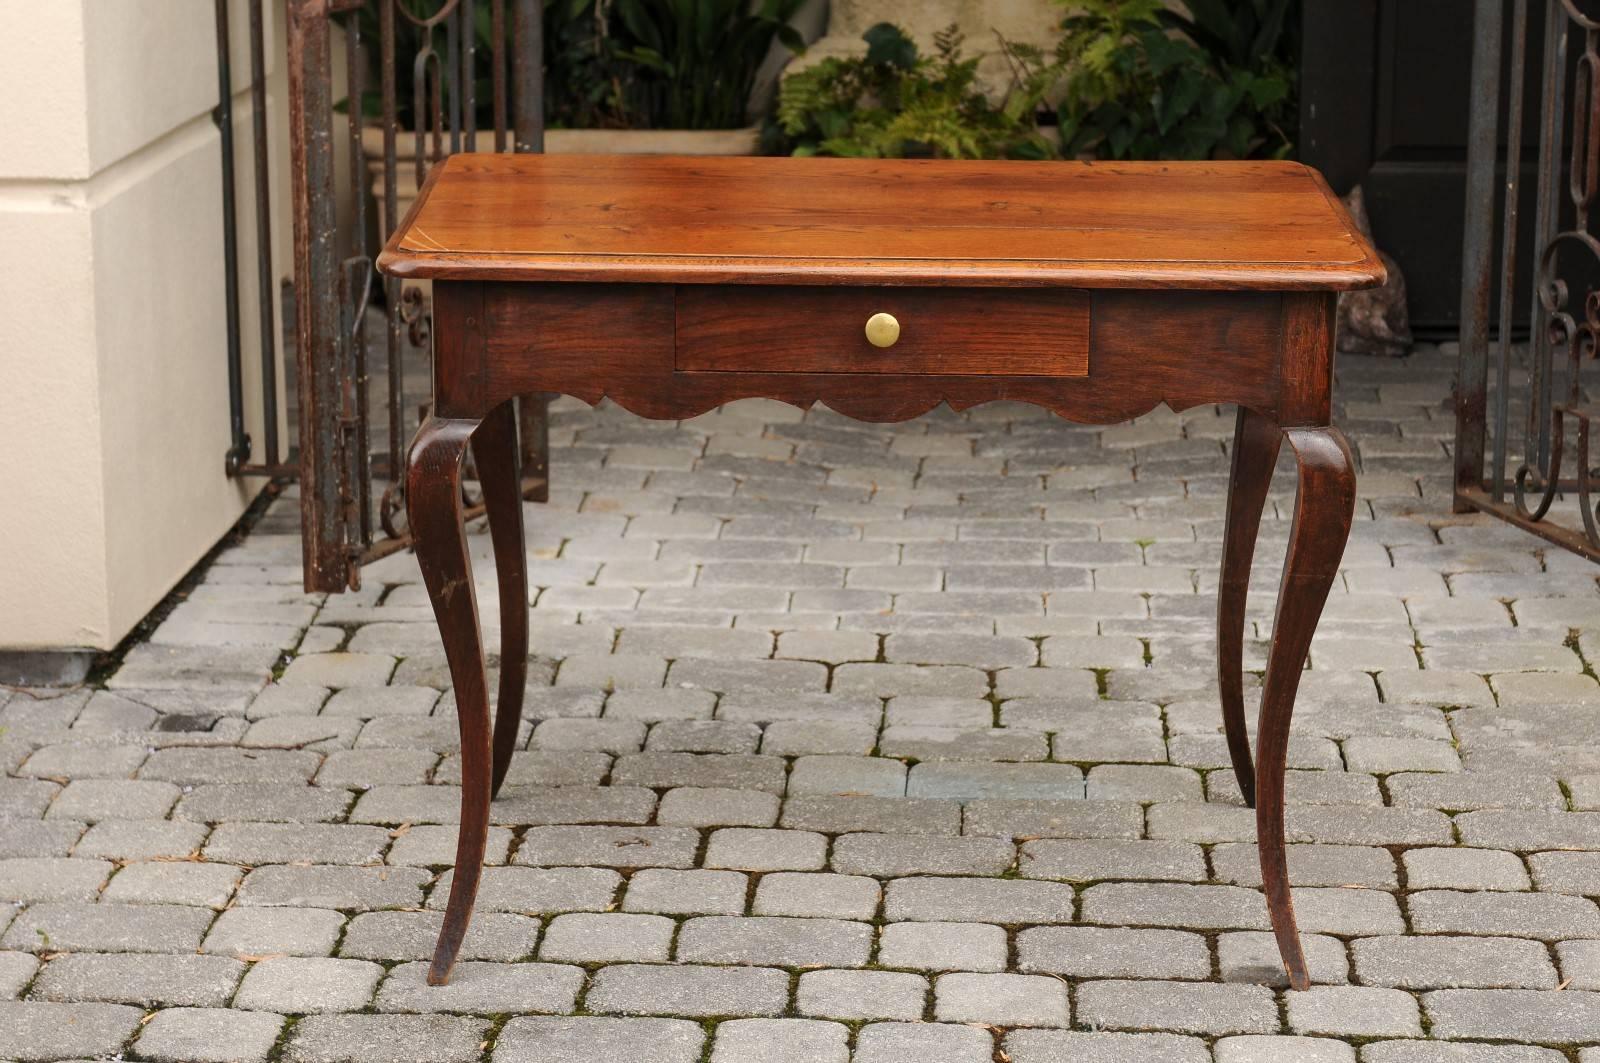 A French Louis XV style oak side table with single drawer, scalloped apron and cabriole legs from the early 19th century. Born during the early years of the 19th century, this French side table features a rectangular top with rounded corners and